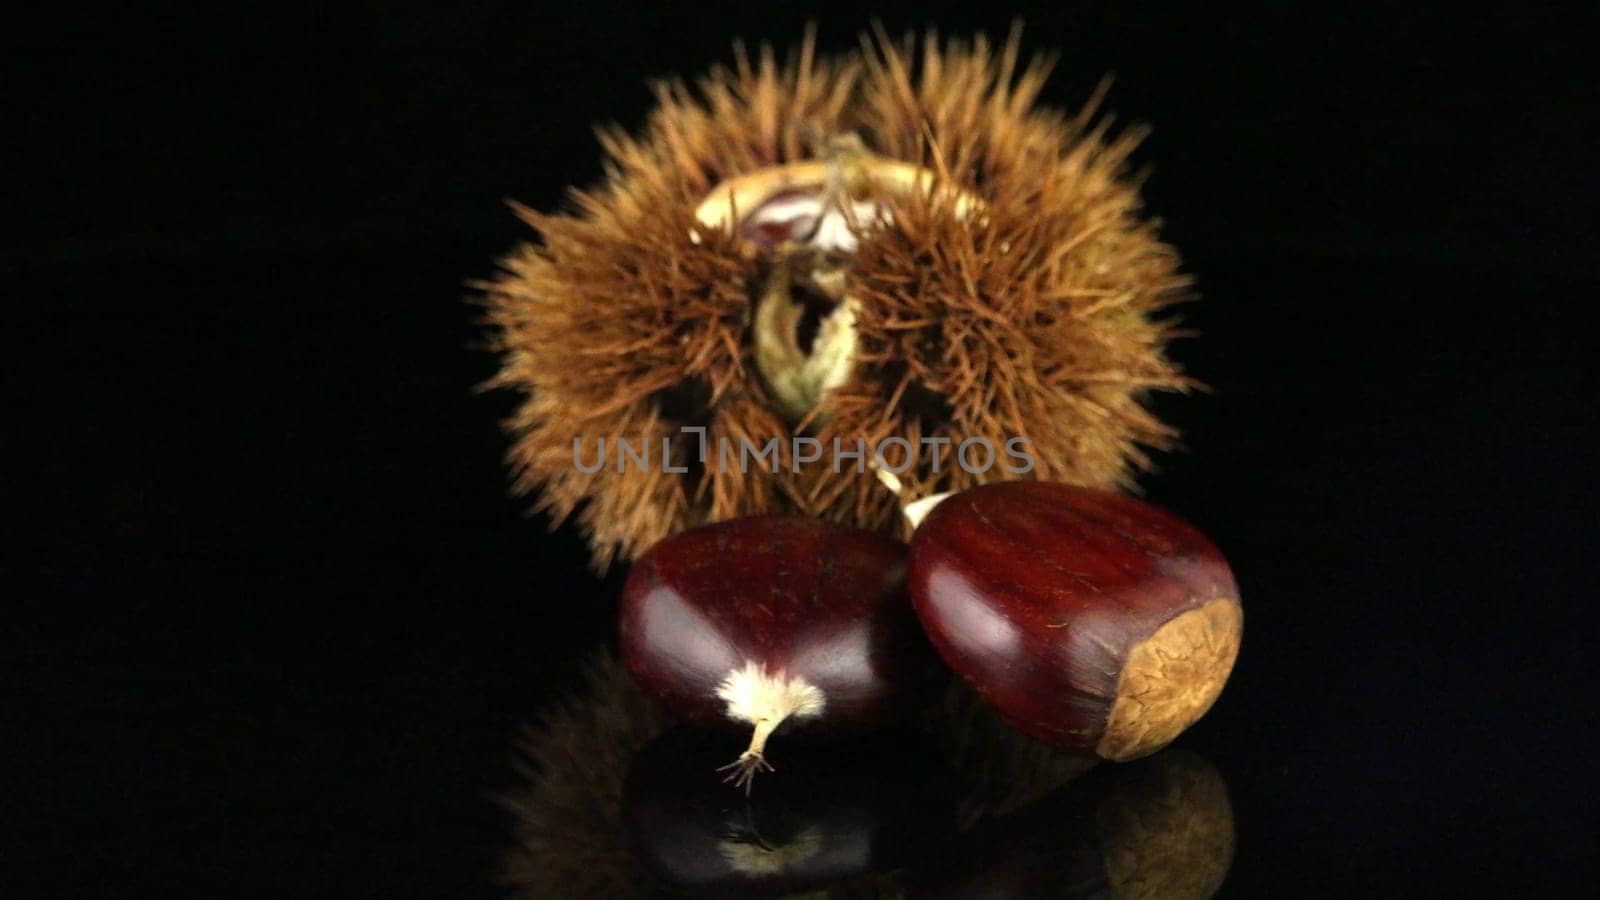 Chestnuts on a black reflective background by homydesign